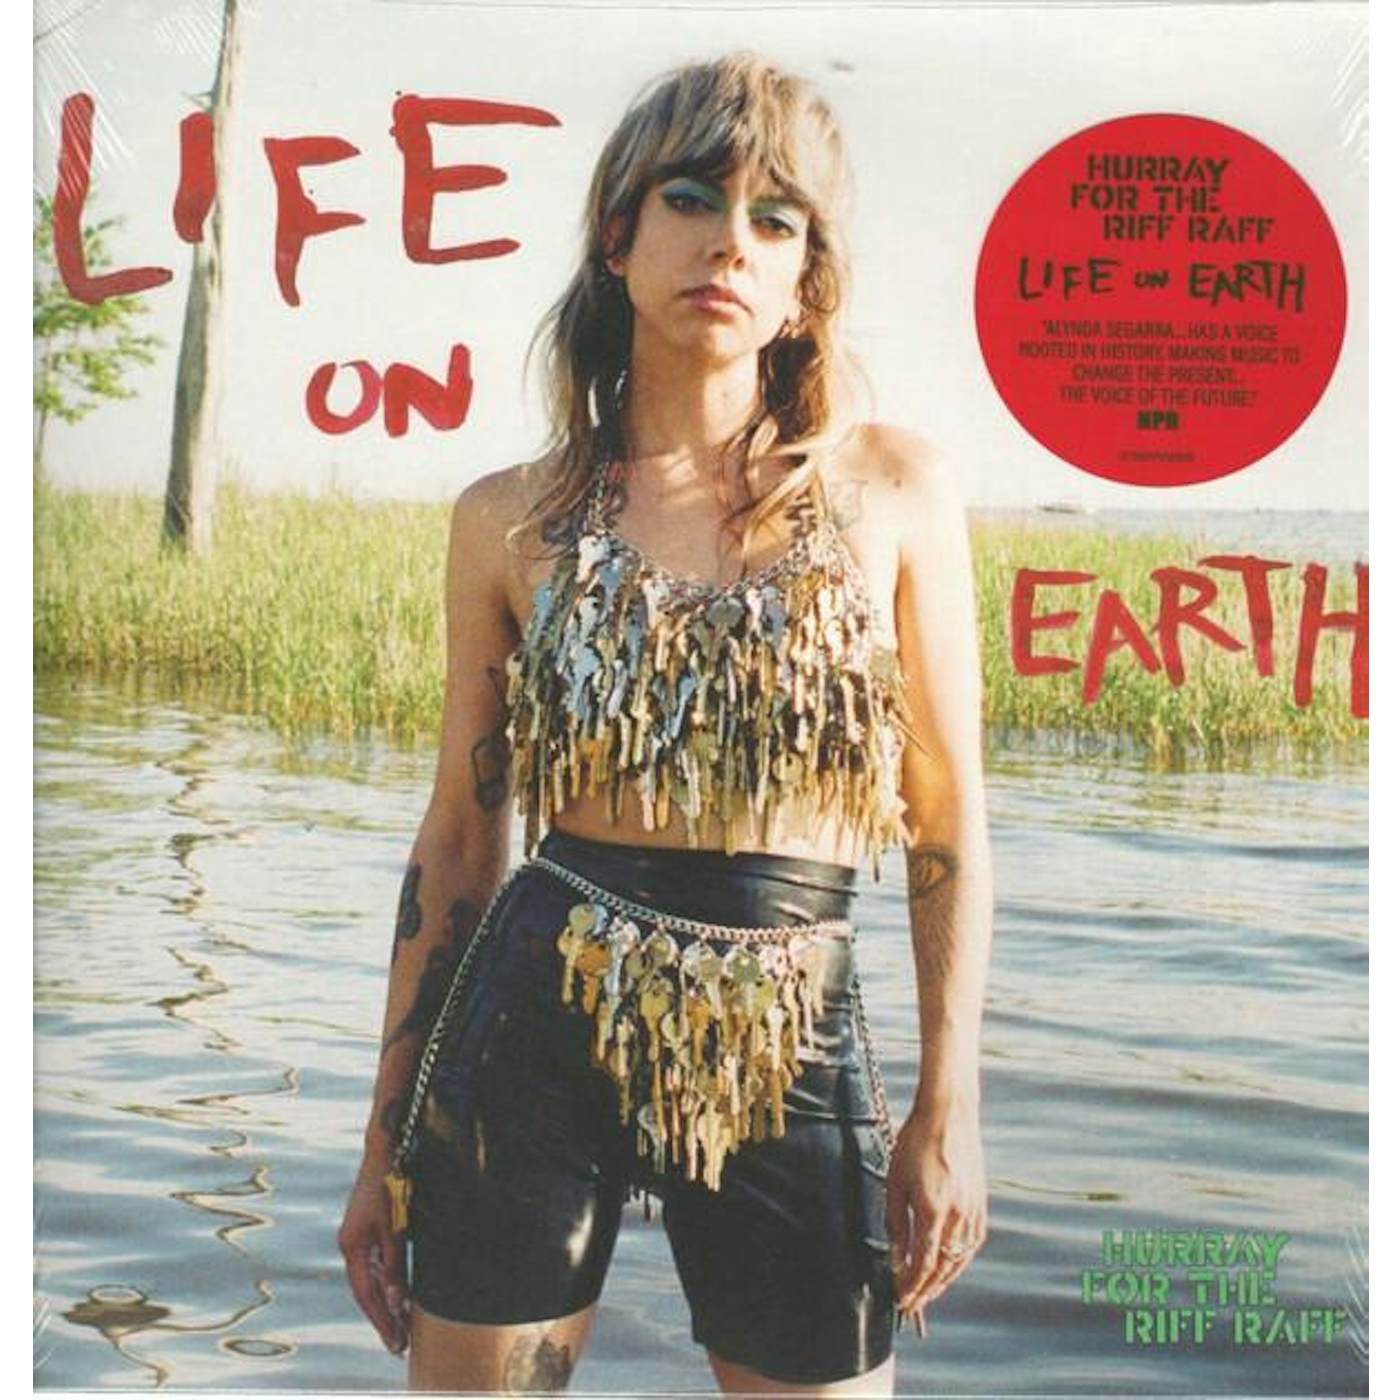 Hurray For The Riff Raff LIFE ON EARTH Vinyl Record